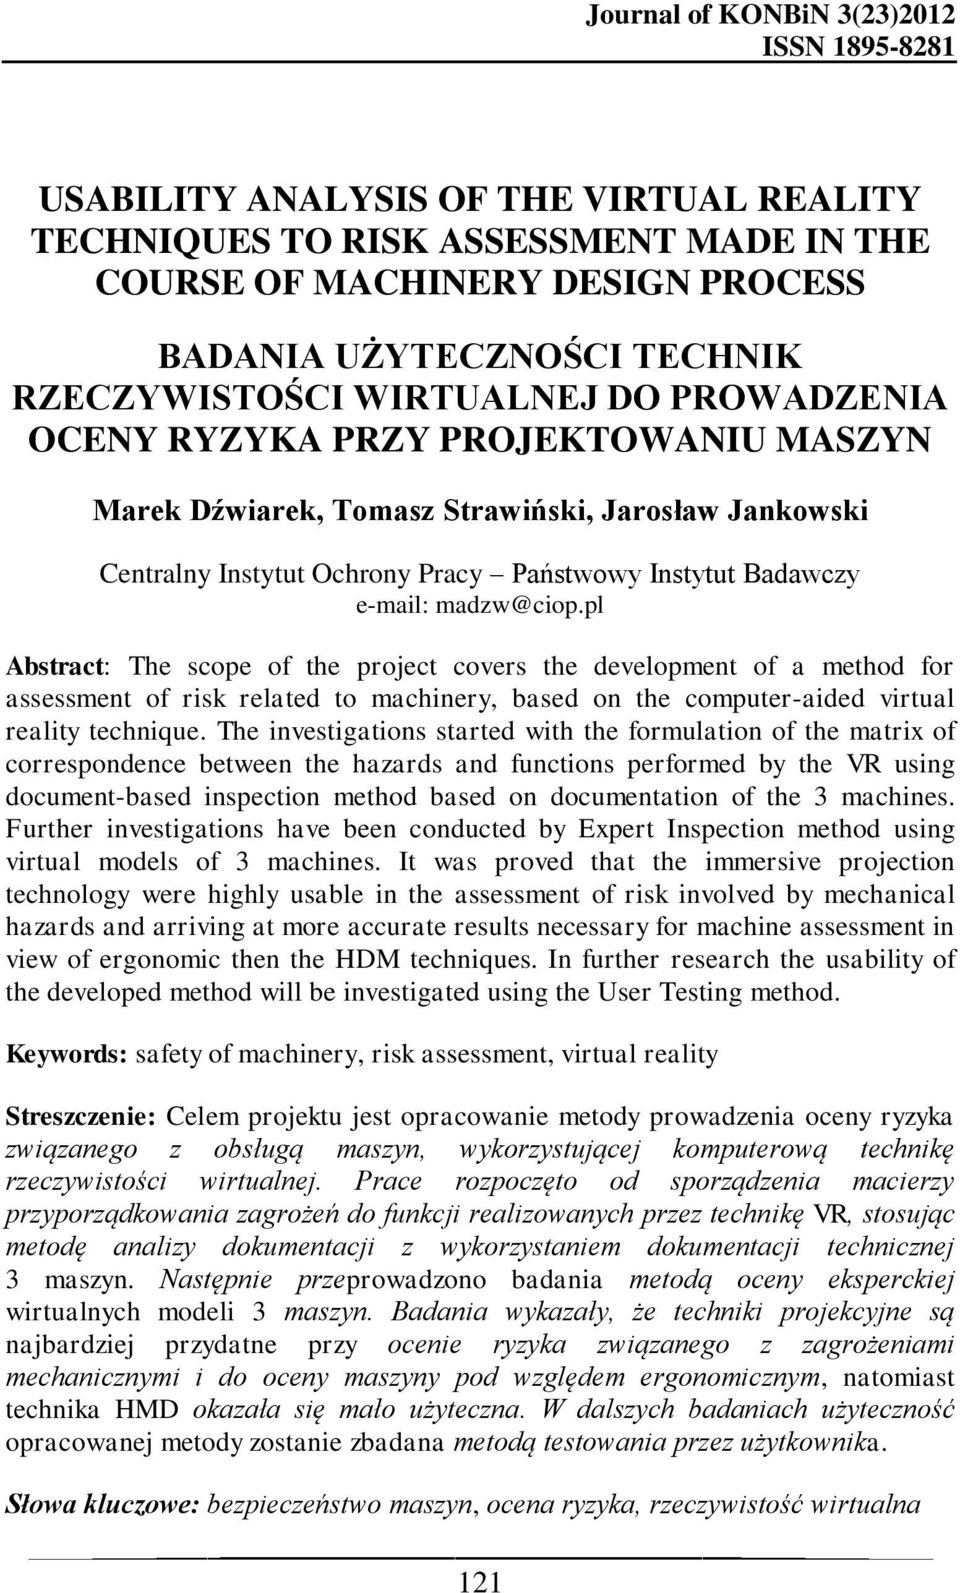 e-mail: madzw@ciop.pl Abstract: The scope of the project covers the development of a method for assessment of risk related to machinery, based on the computer-aided virtual reality technique.